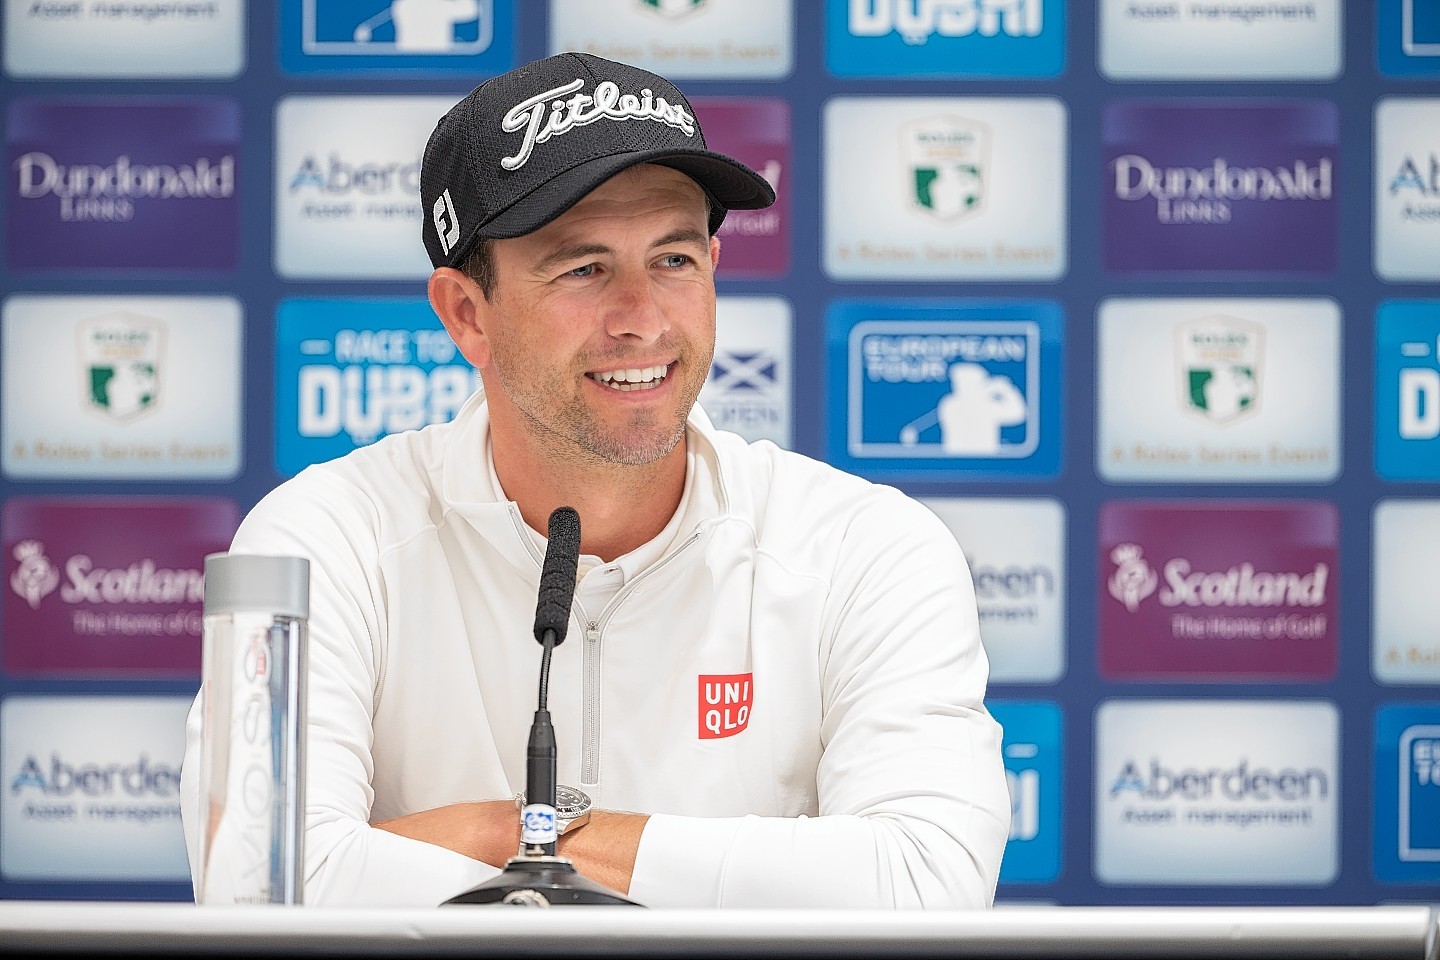 Adam Scott is making his first appearance at the Scottish Open since 2009.